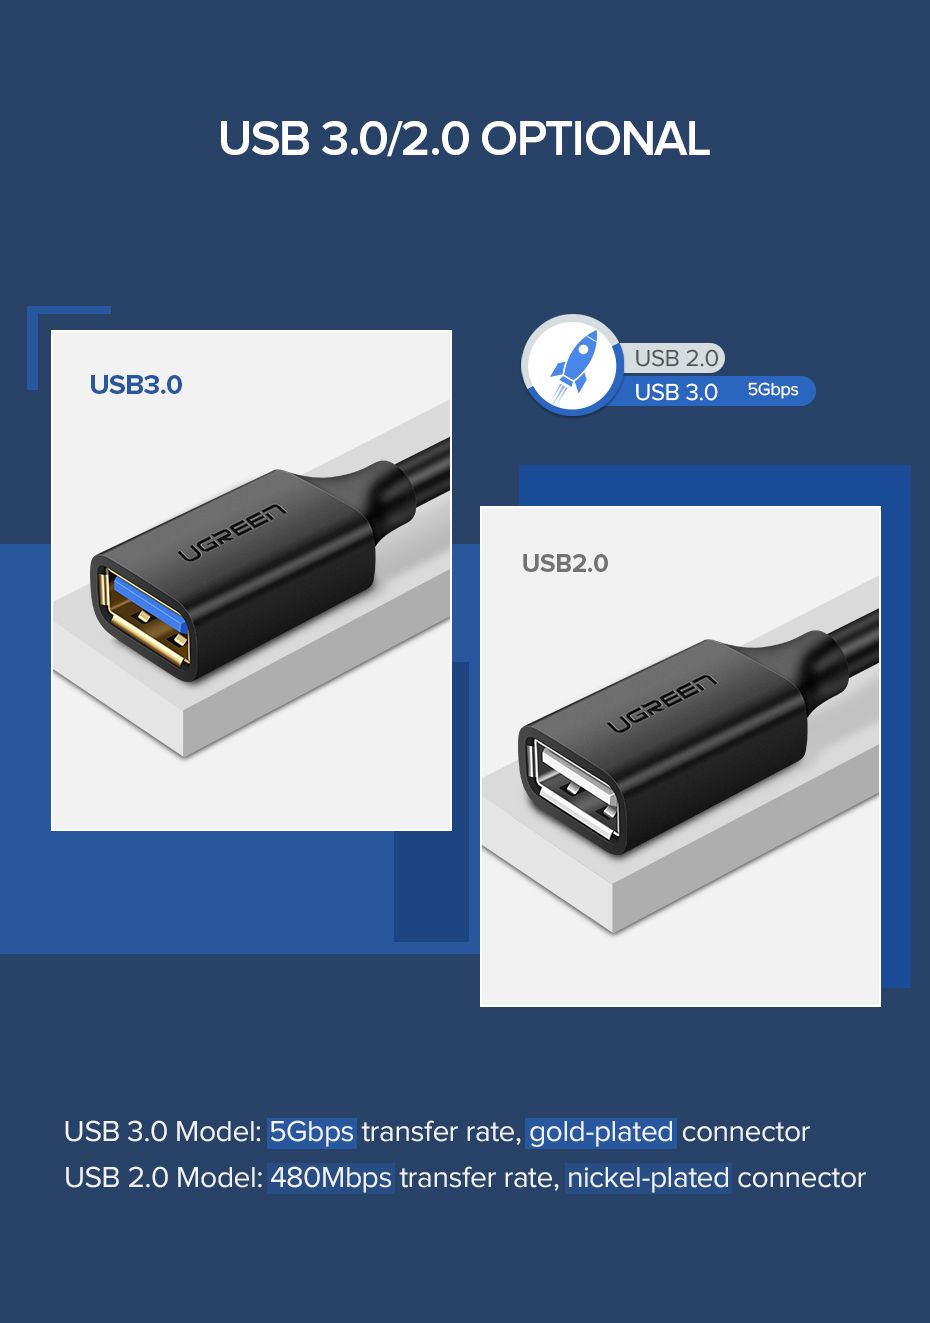 Ugreen-USB-Extension-Cable-USB-20-Cable-Data-Cable-for-Smart-TV-PS4-Extender-Data-Cord-Mini-USB-Exte-1645674